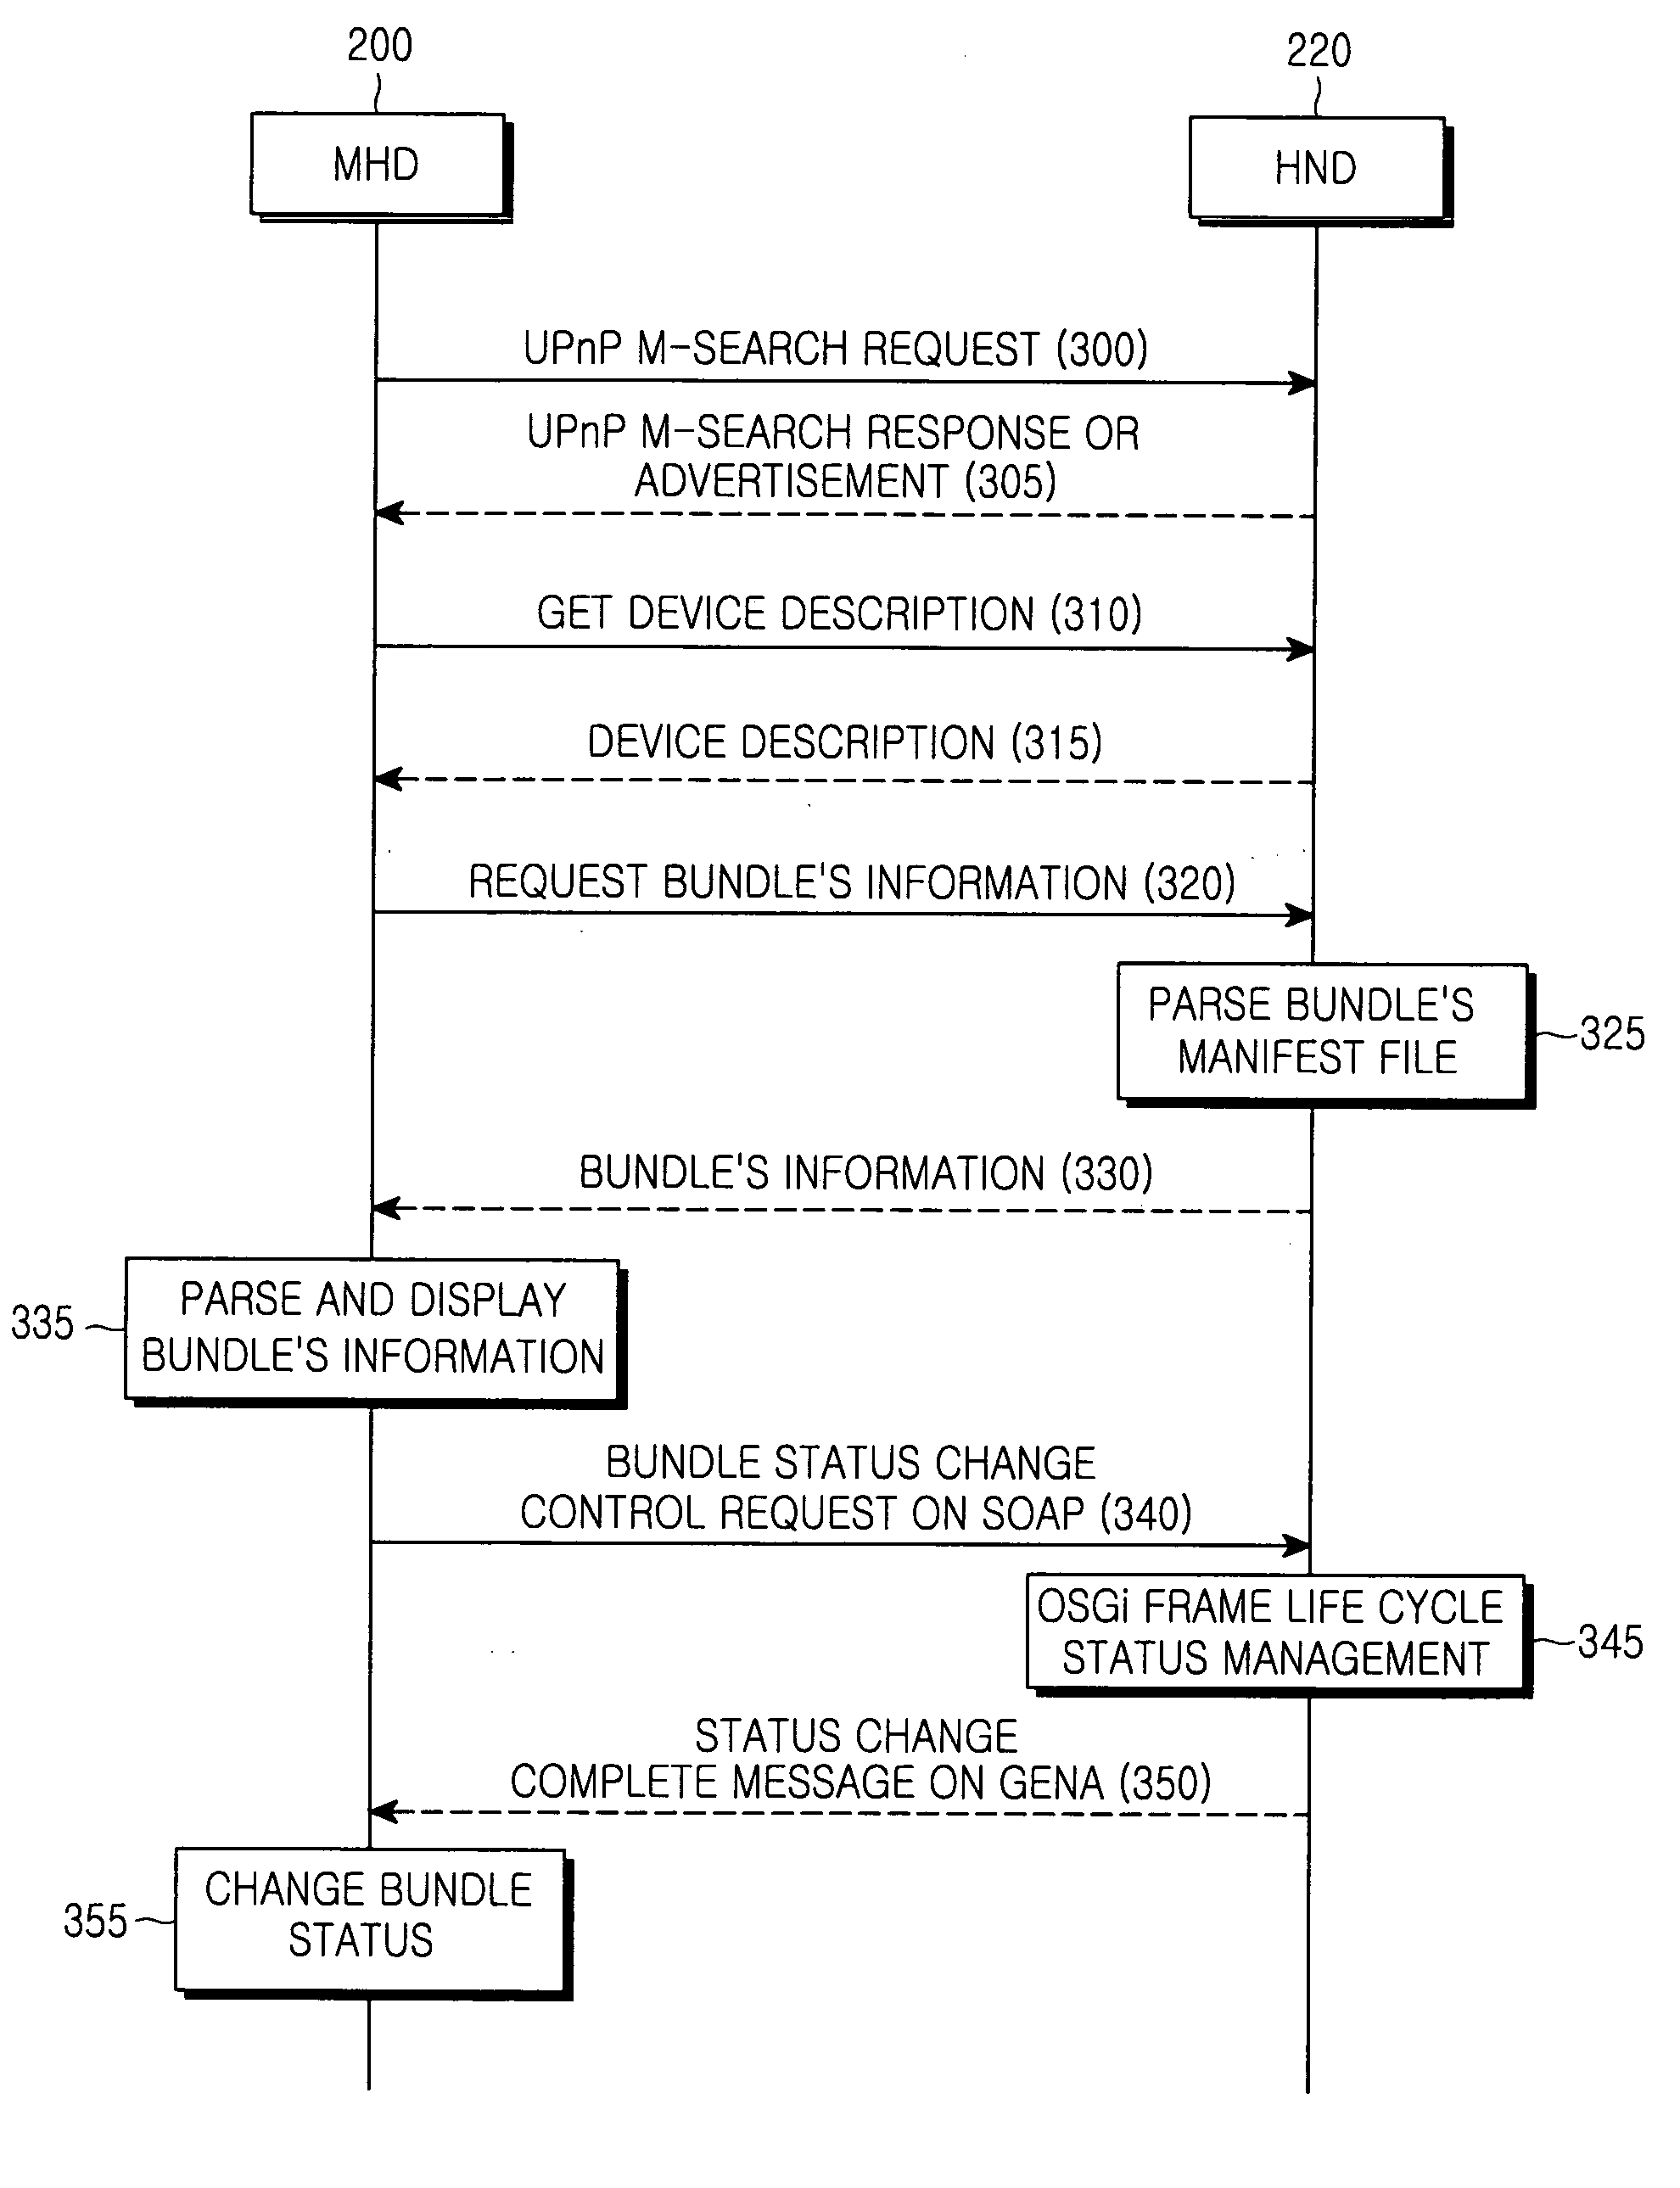 System and method for managing applications of home network devices